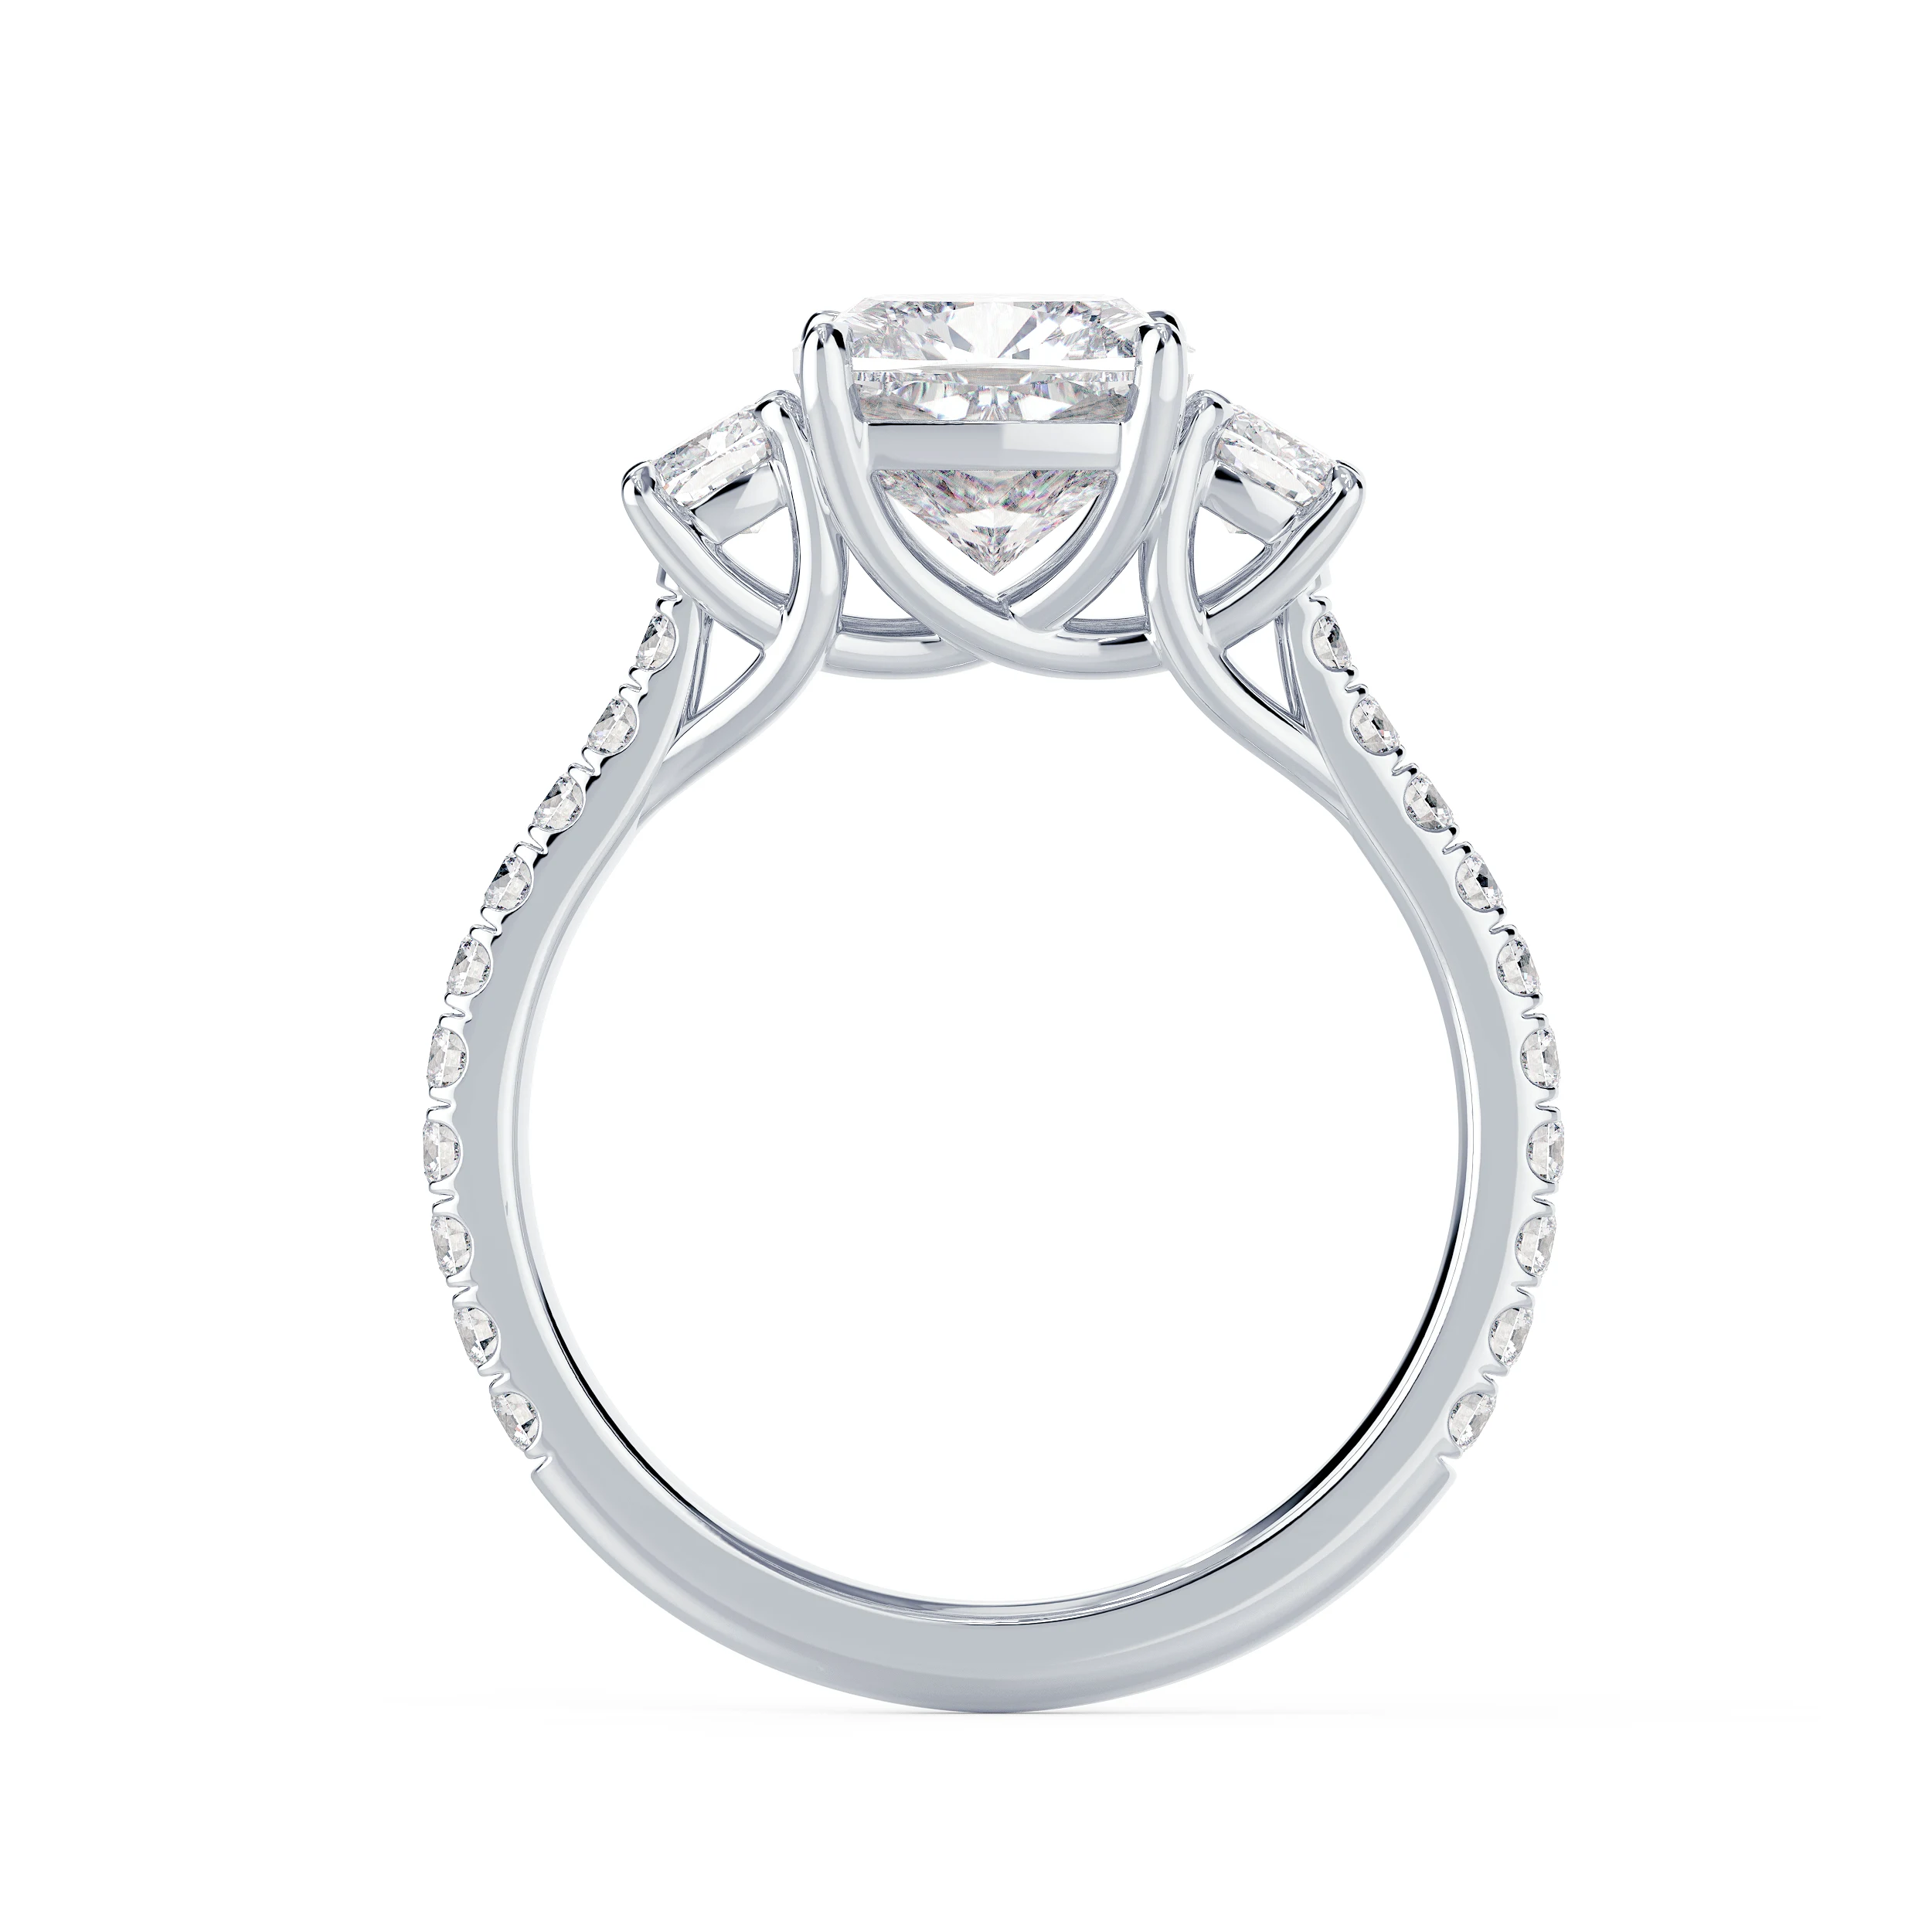 White Gold Cushion Three Stone Pavé Diamond Engagement Ring featuring Exceptional Quality 2.0 Carat Diamonds (Profile View)